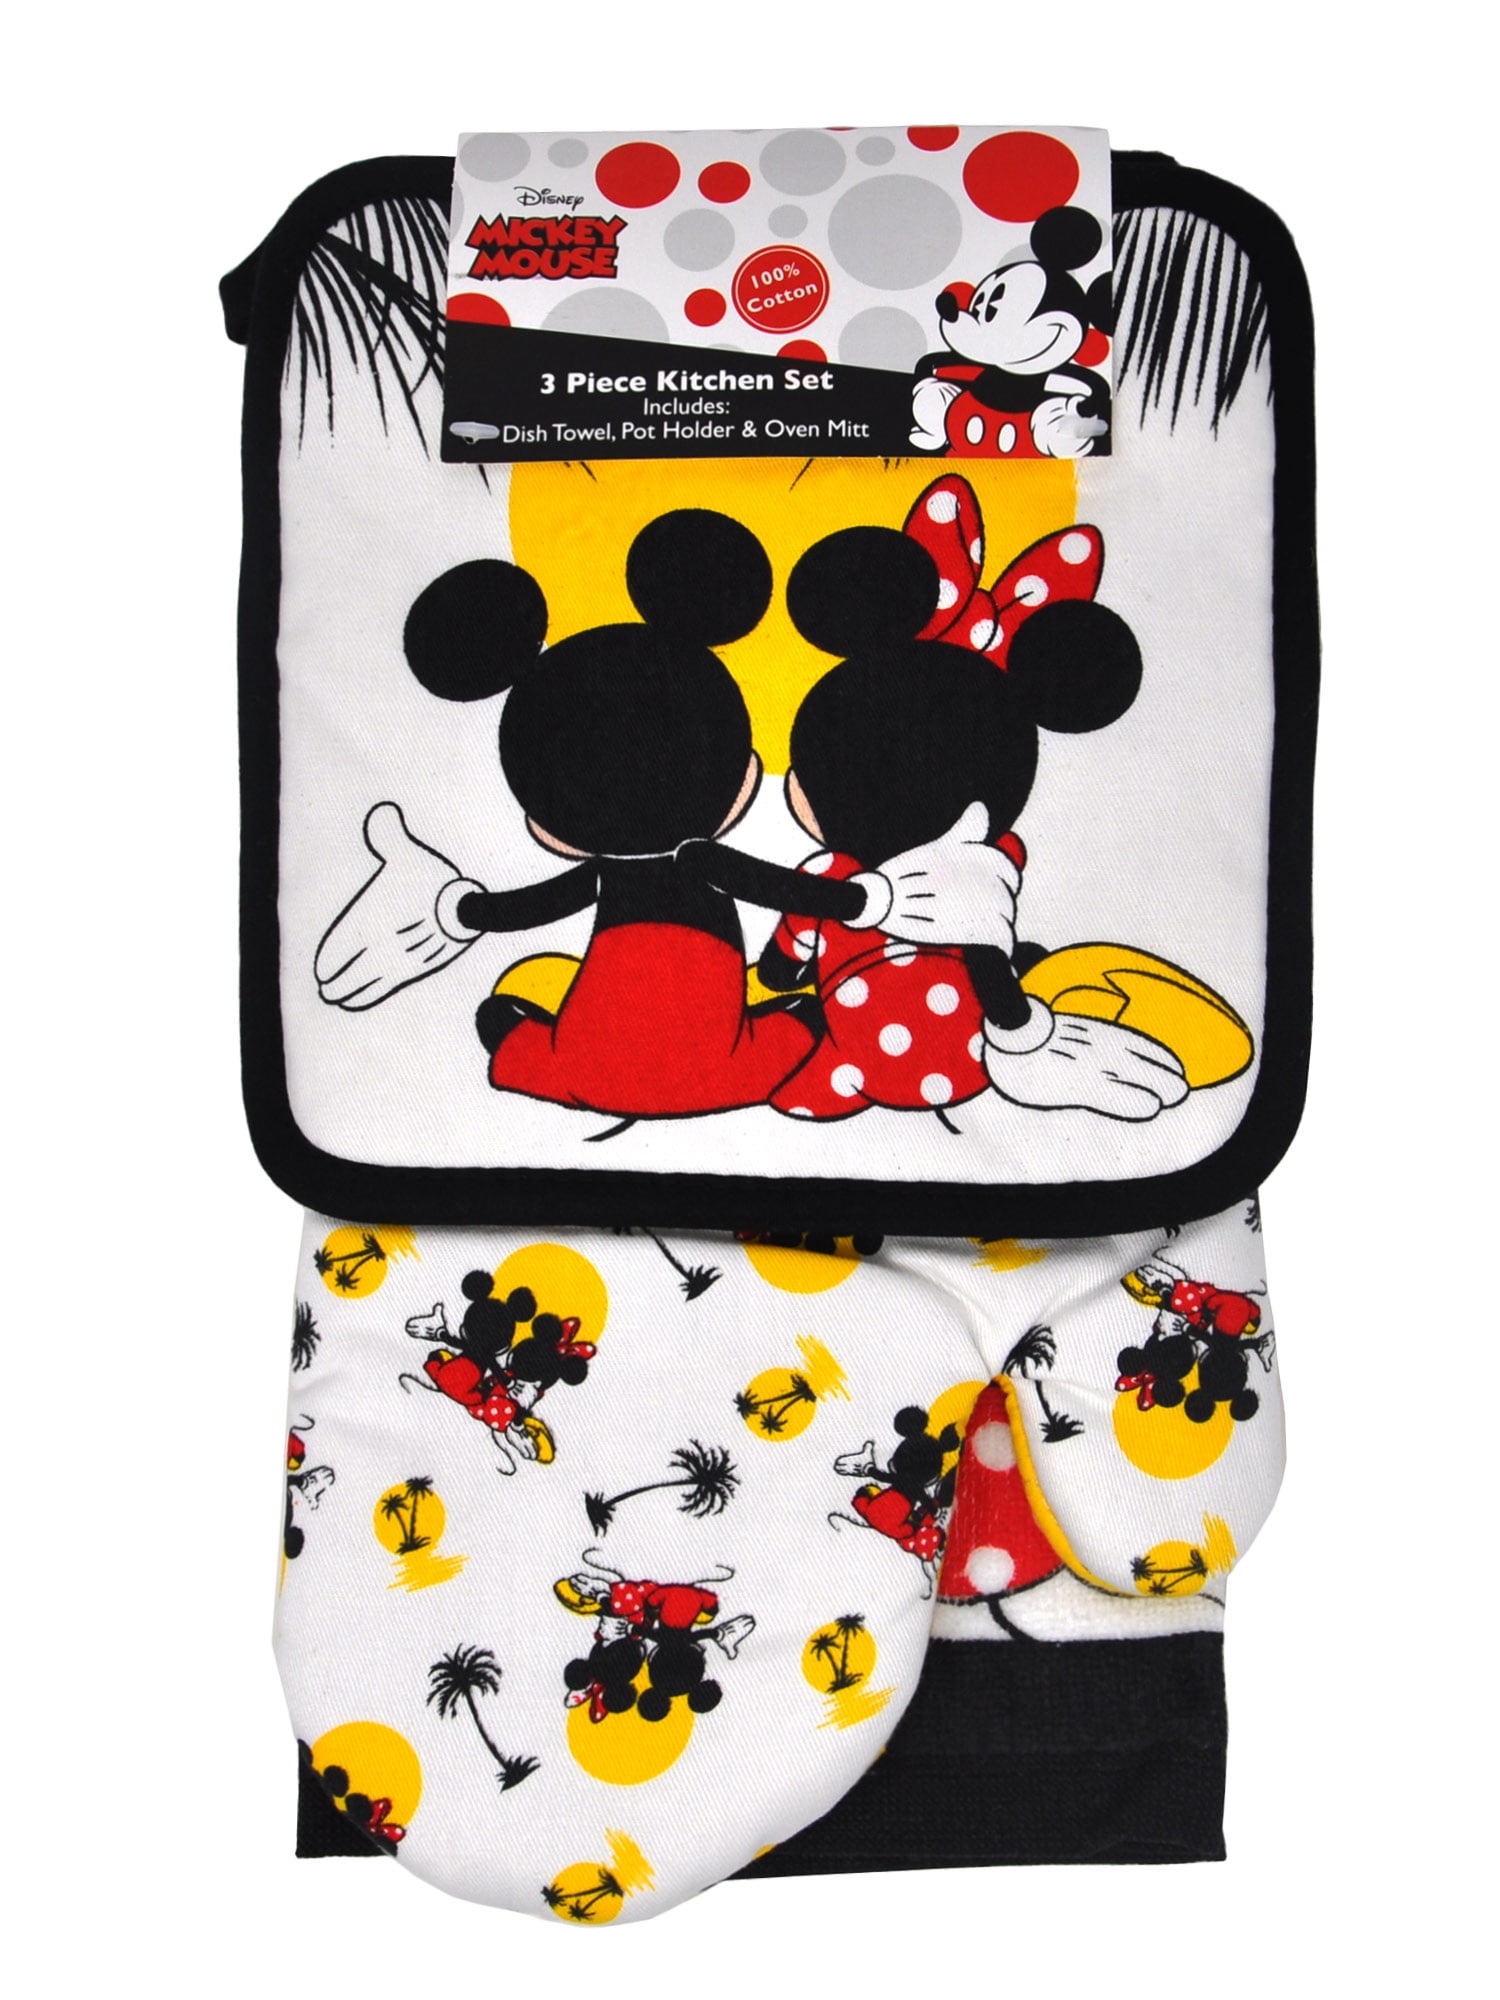 Pot Holder New Authentic Original Disney Parks Red Minnie Mouse Oven Mitt 